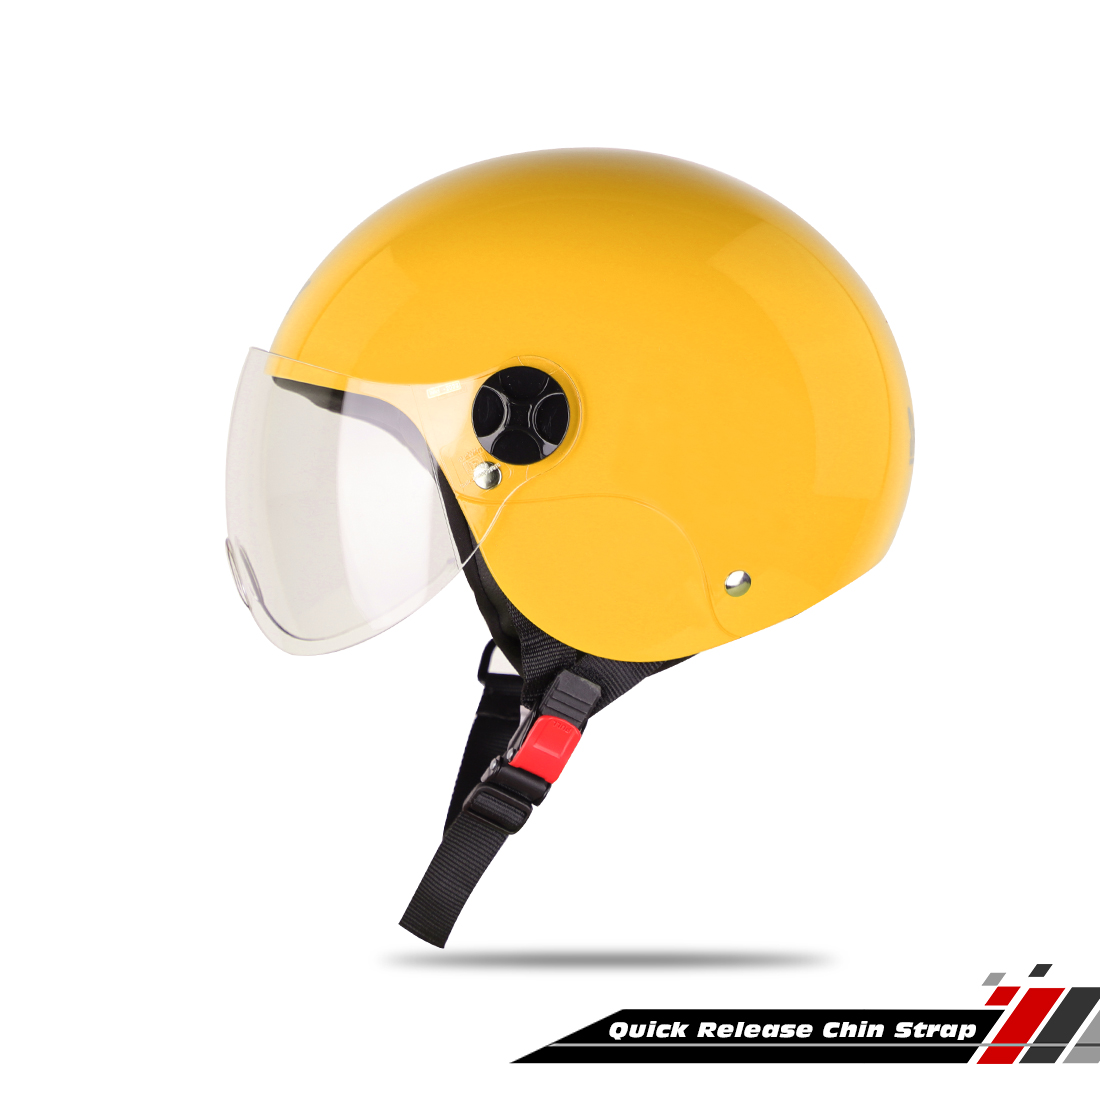 Steelbird SBH-16 Dex ISI Certified Open Face Helmet (Glossy Yellow With Clear Visor)